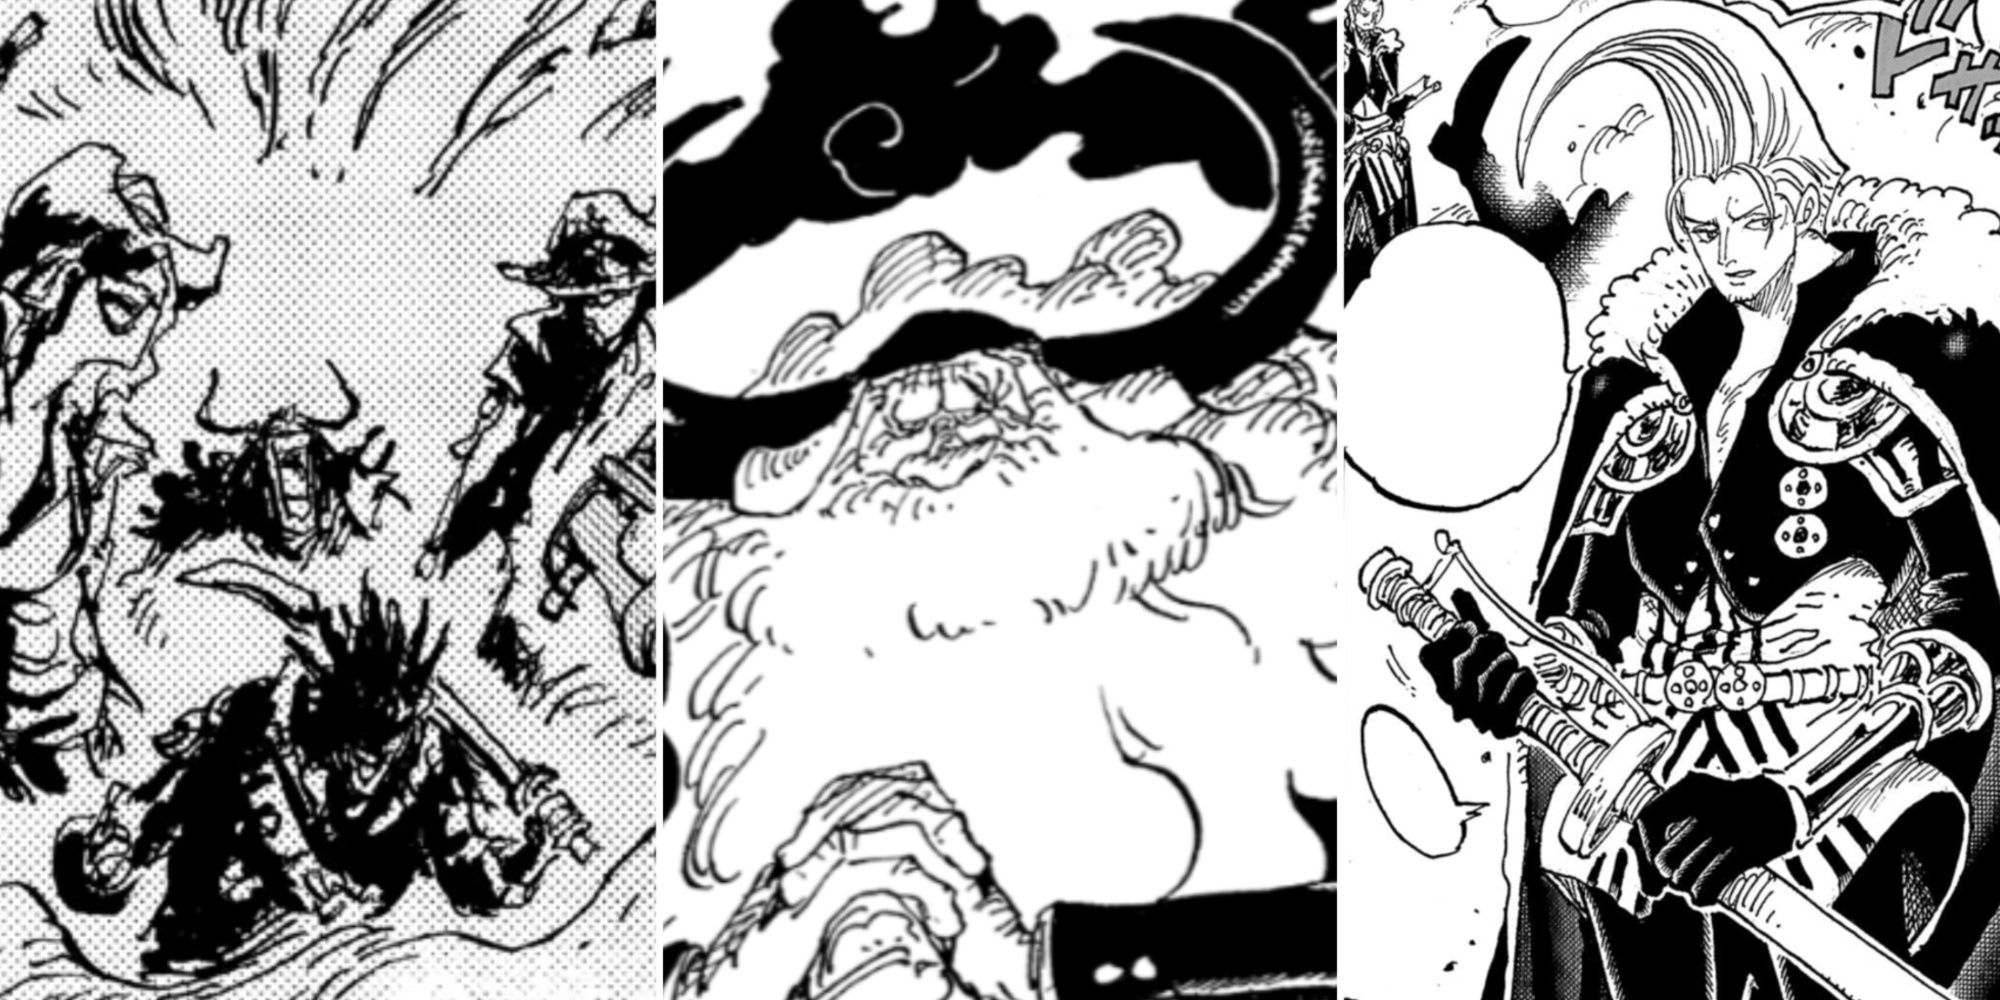 Cover Image For The Strongest One Piece Villains With Rocks, Saturn, And Figarland